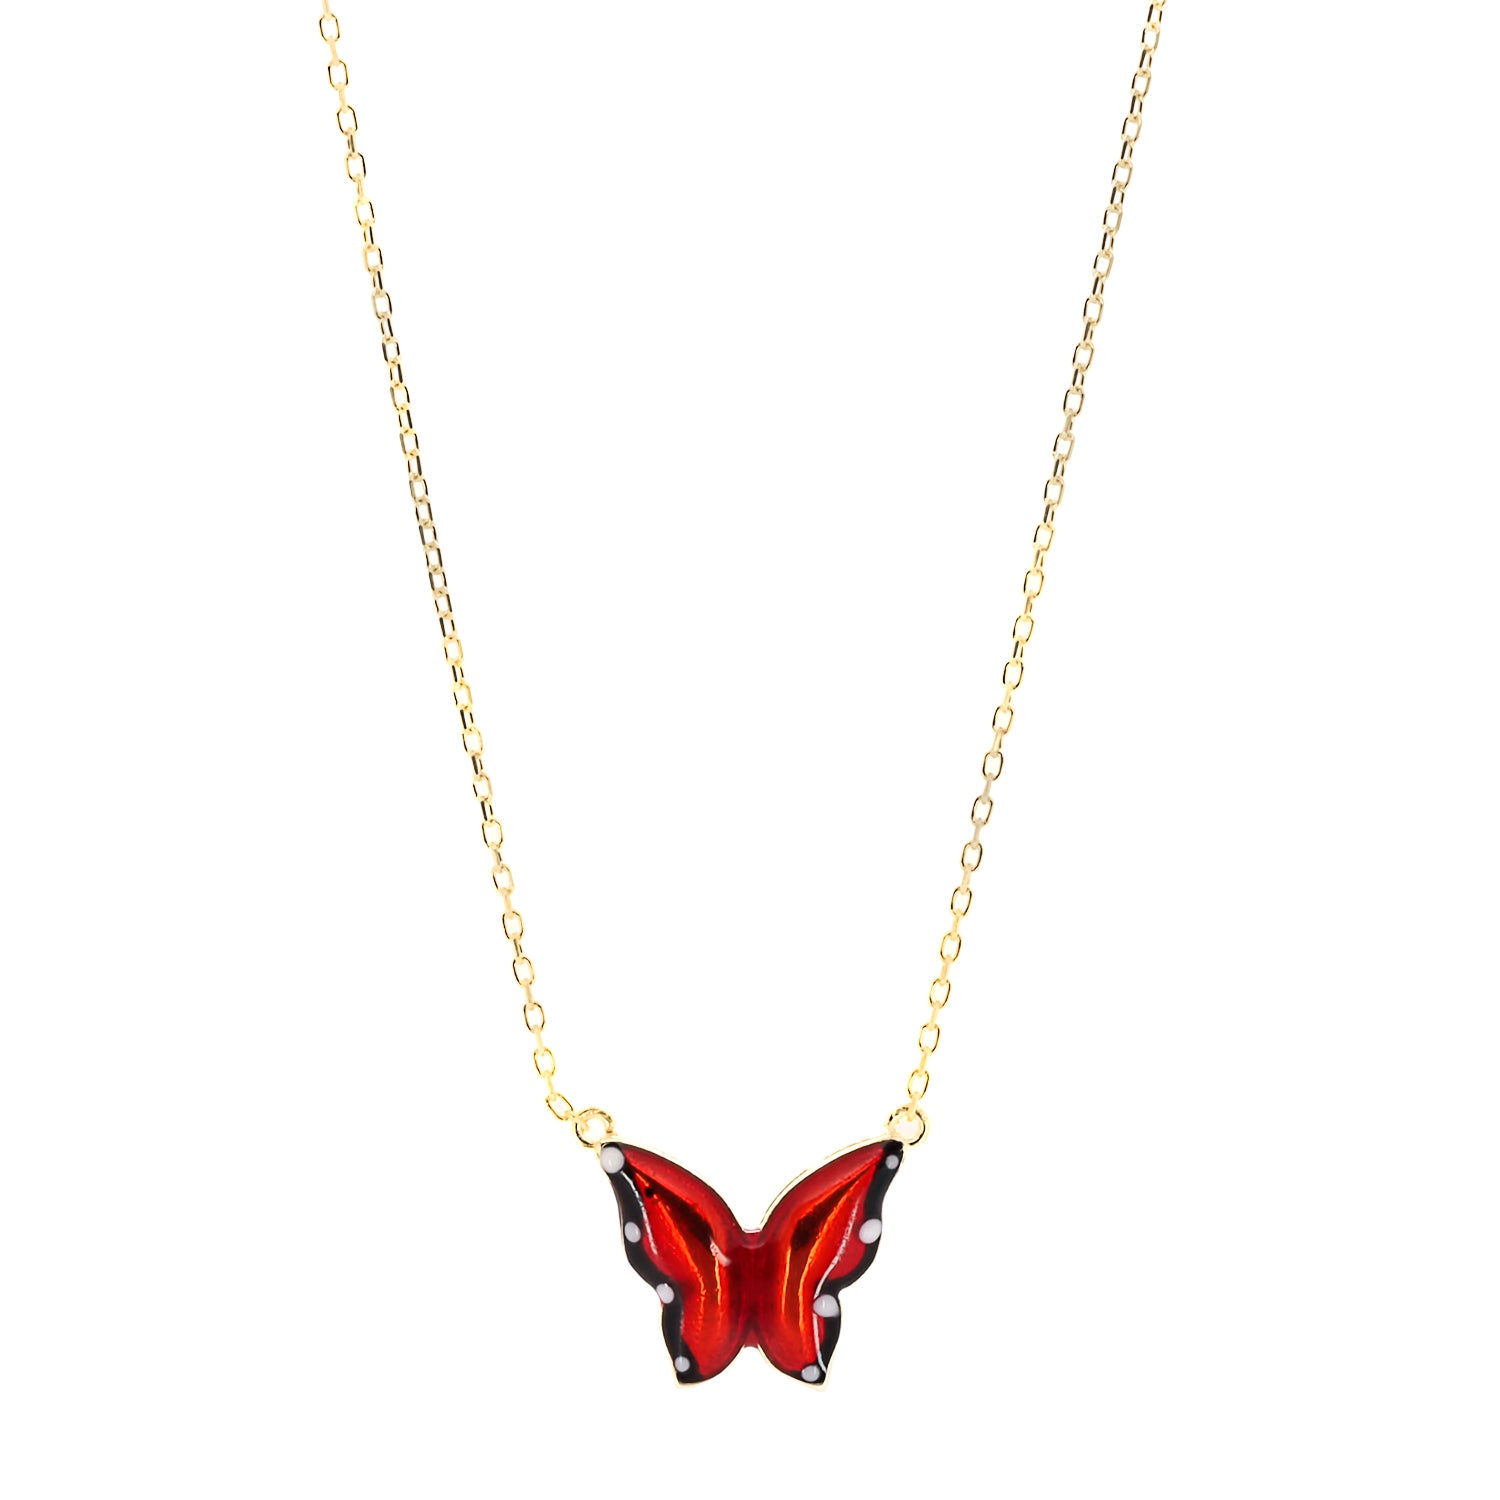 A close-up of the intricate red enamel design on the Gold Joy Butterfly Necklace.